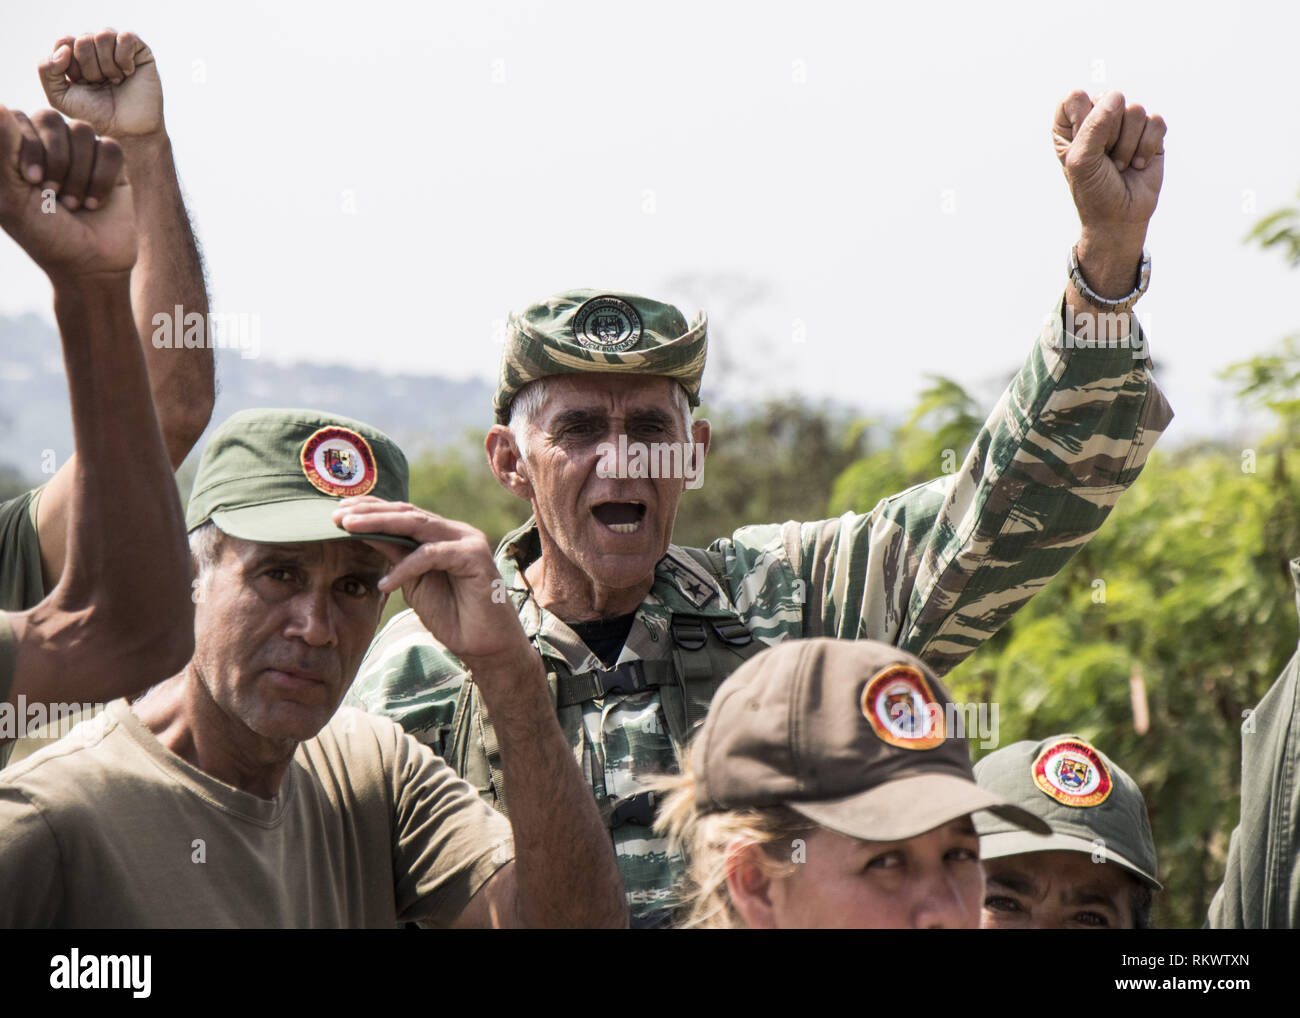 Caracas, Venezuela. 12th Feb, 2019. members of Venezuela's Bolivarian National Guard patrols at Tienditas international bridge in Urena, Tachira state, Venezuela, in the border with Colombia, backdropped by containers placed by Venezuelan military forces to block the bridge, on February 12, 2019. Credit: Elyxandro Cegarra/ZUMA Wire/Alamy Live News Stock Photo